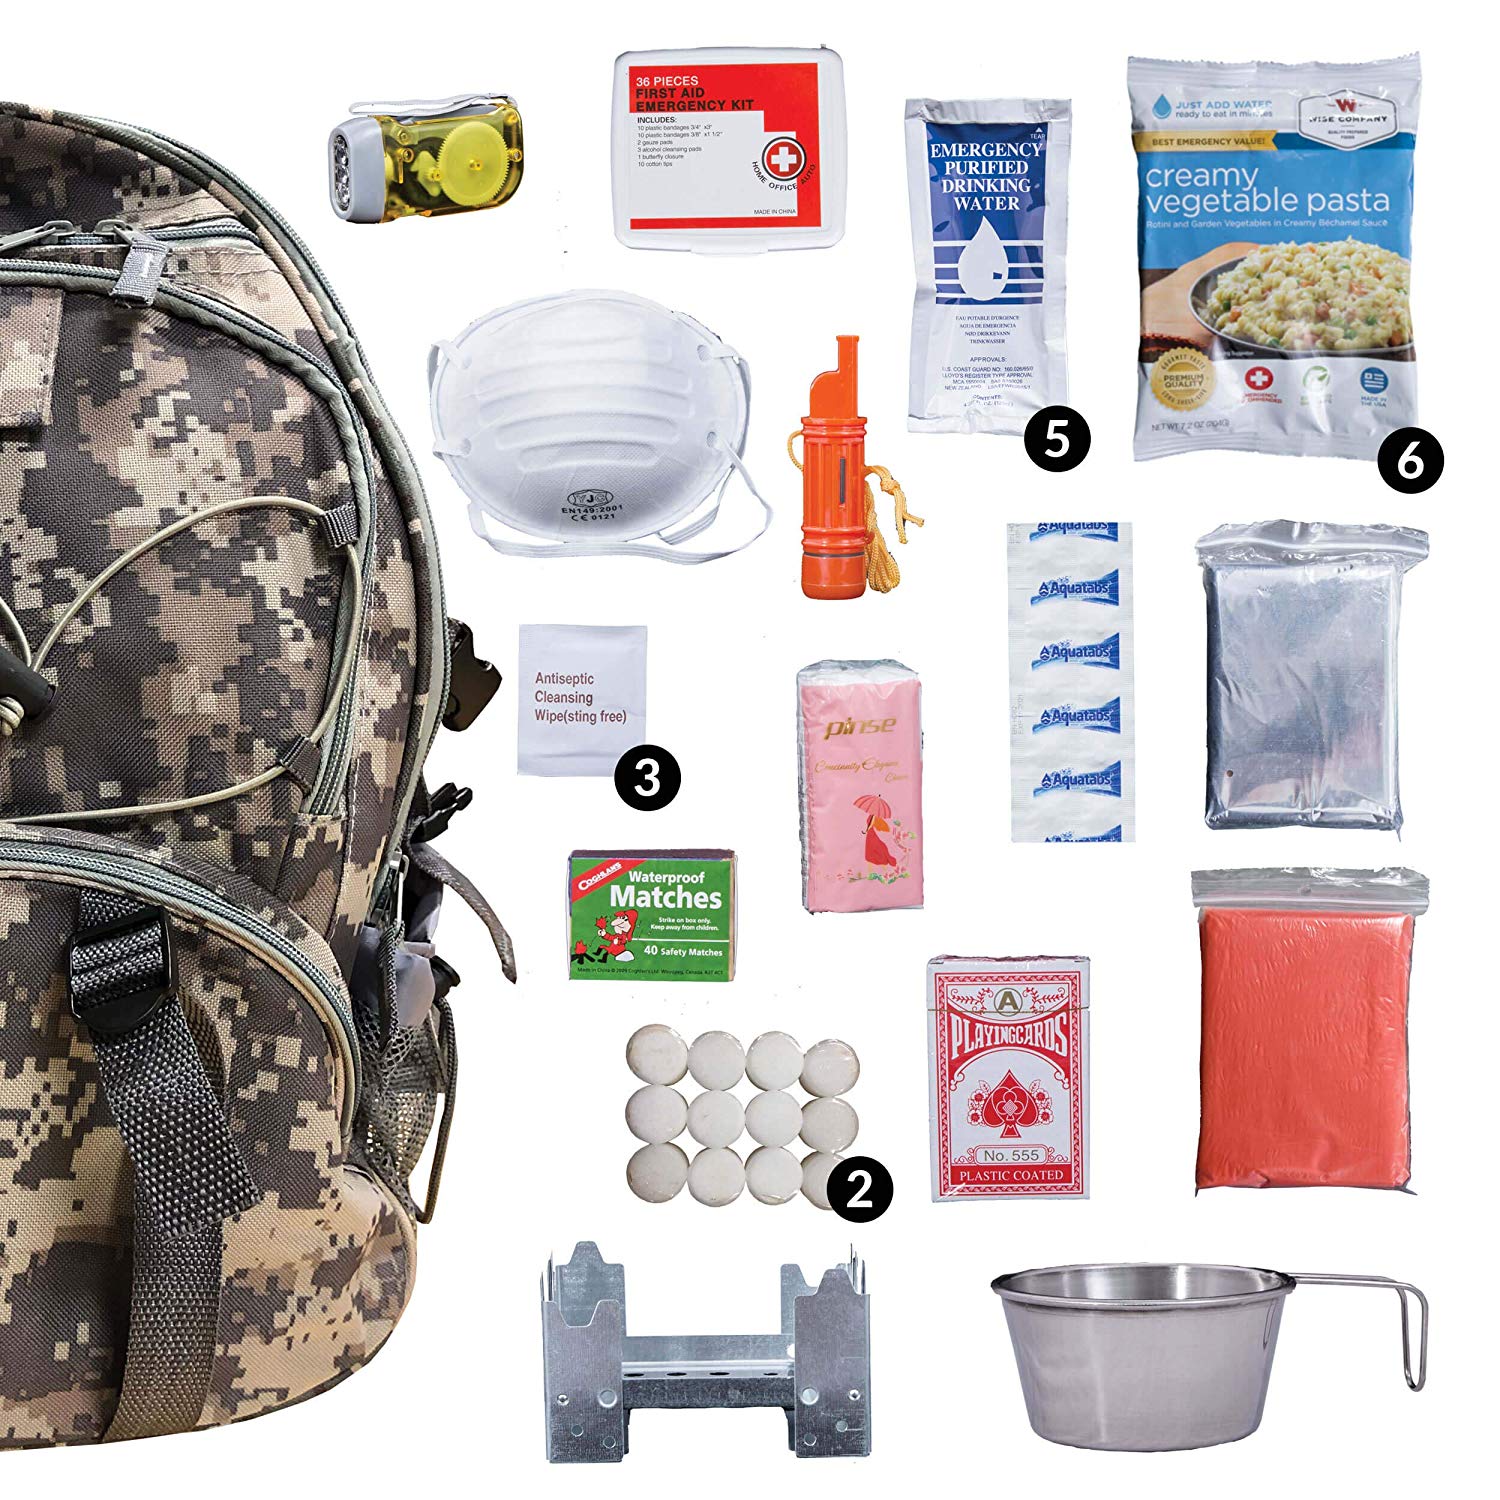 Wise Food Emergency Survival Backpack Kit, Great Go Bag for Hurricanes, Fires, Earthquakes